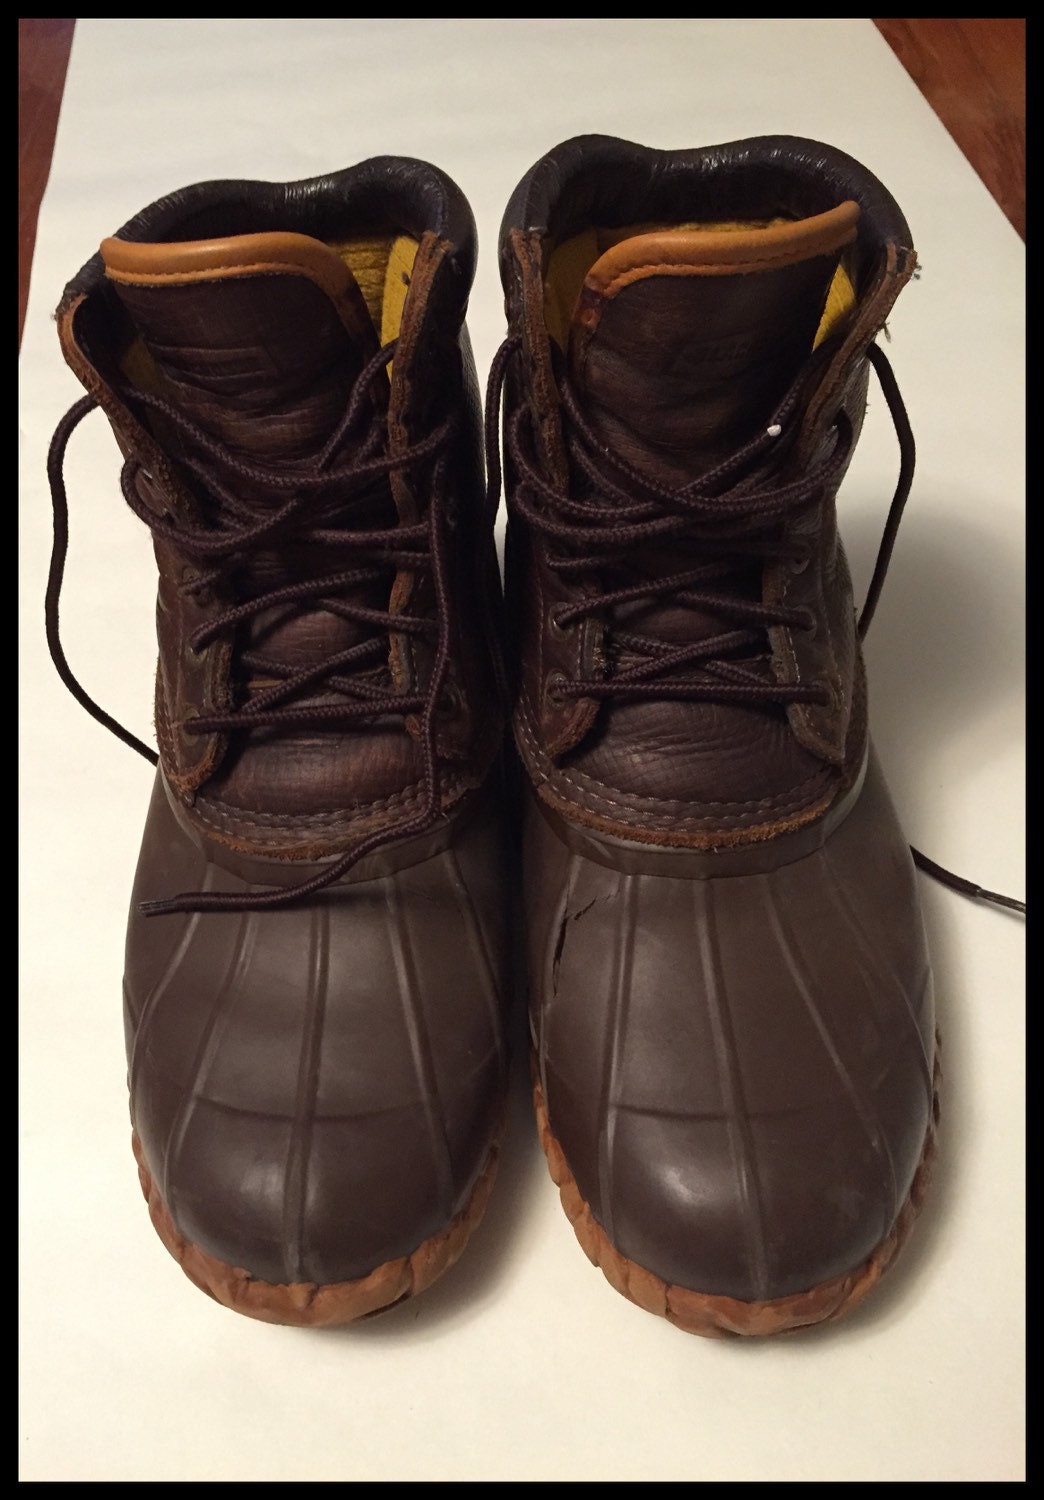 Vintage LaCrosse Thinsulate Lined Duck Boots Men's Size 7